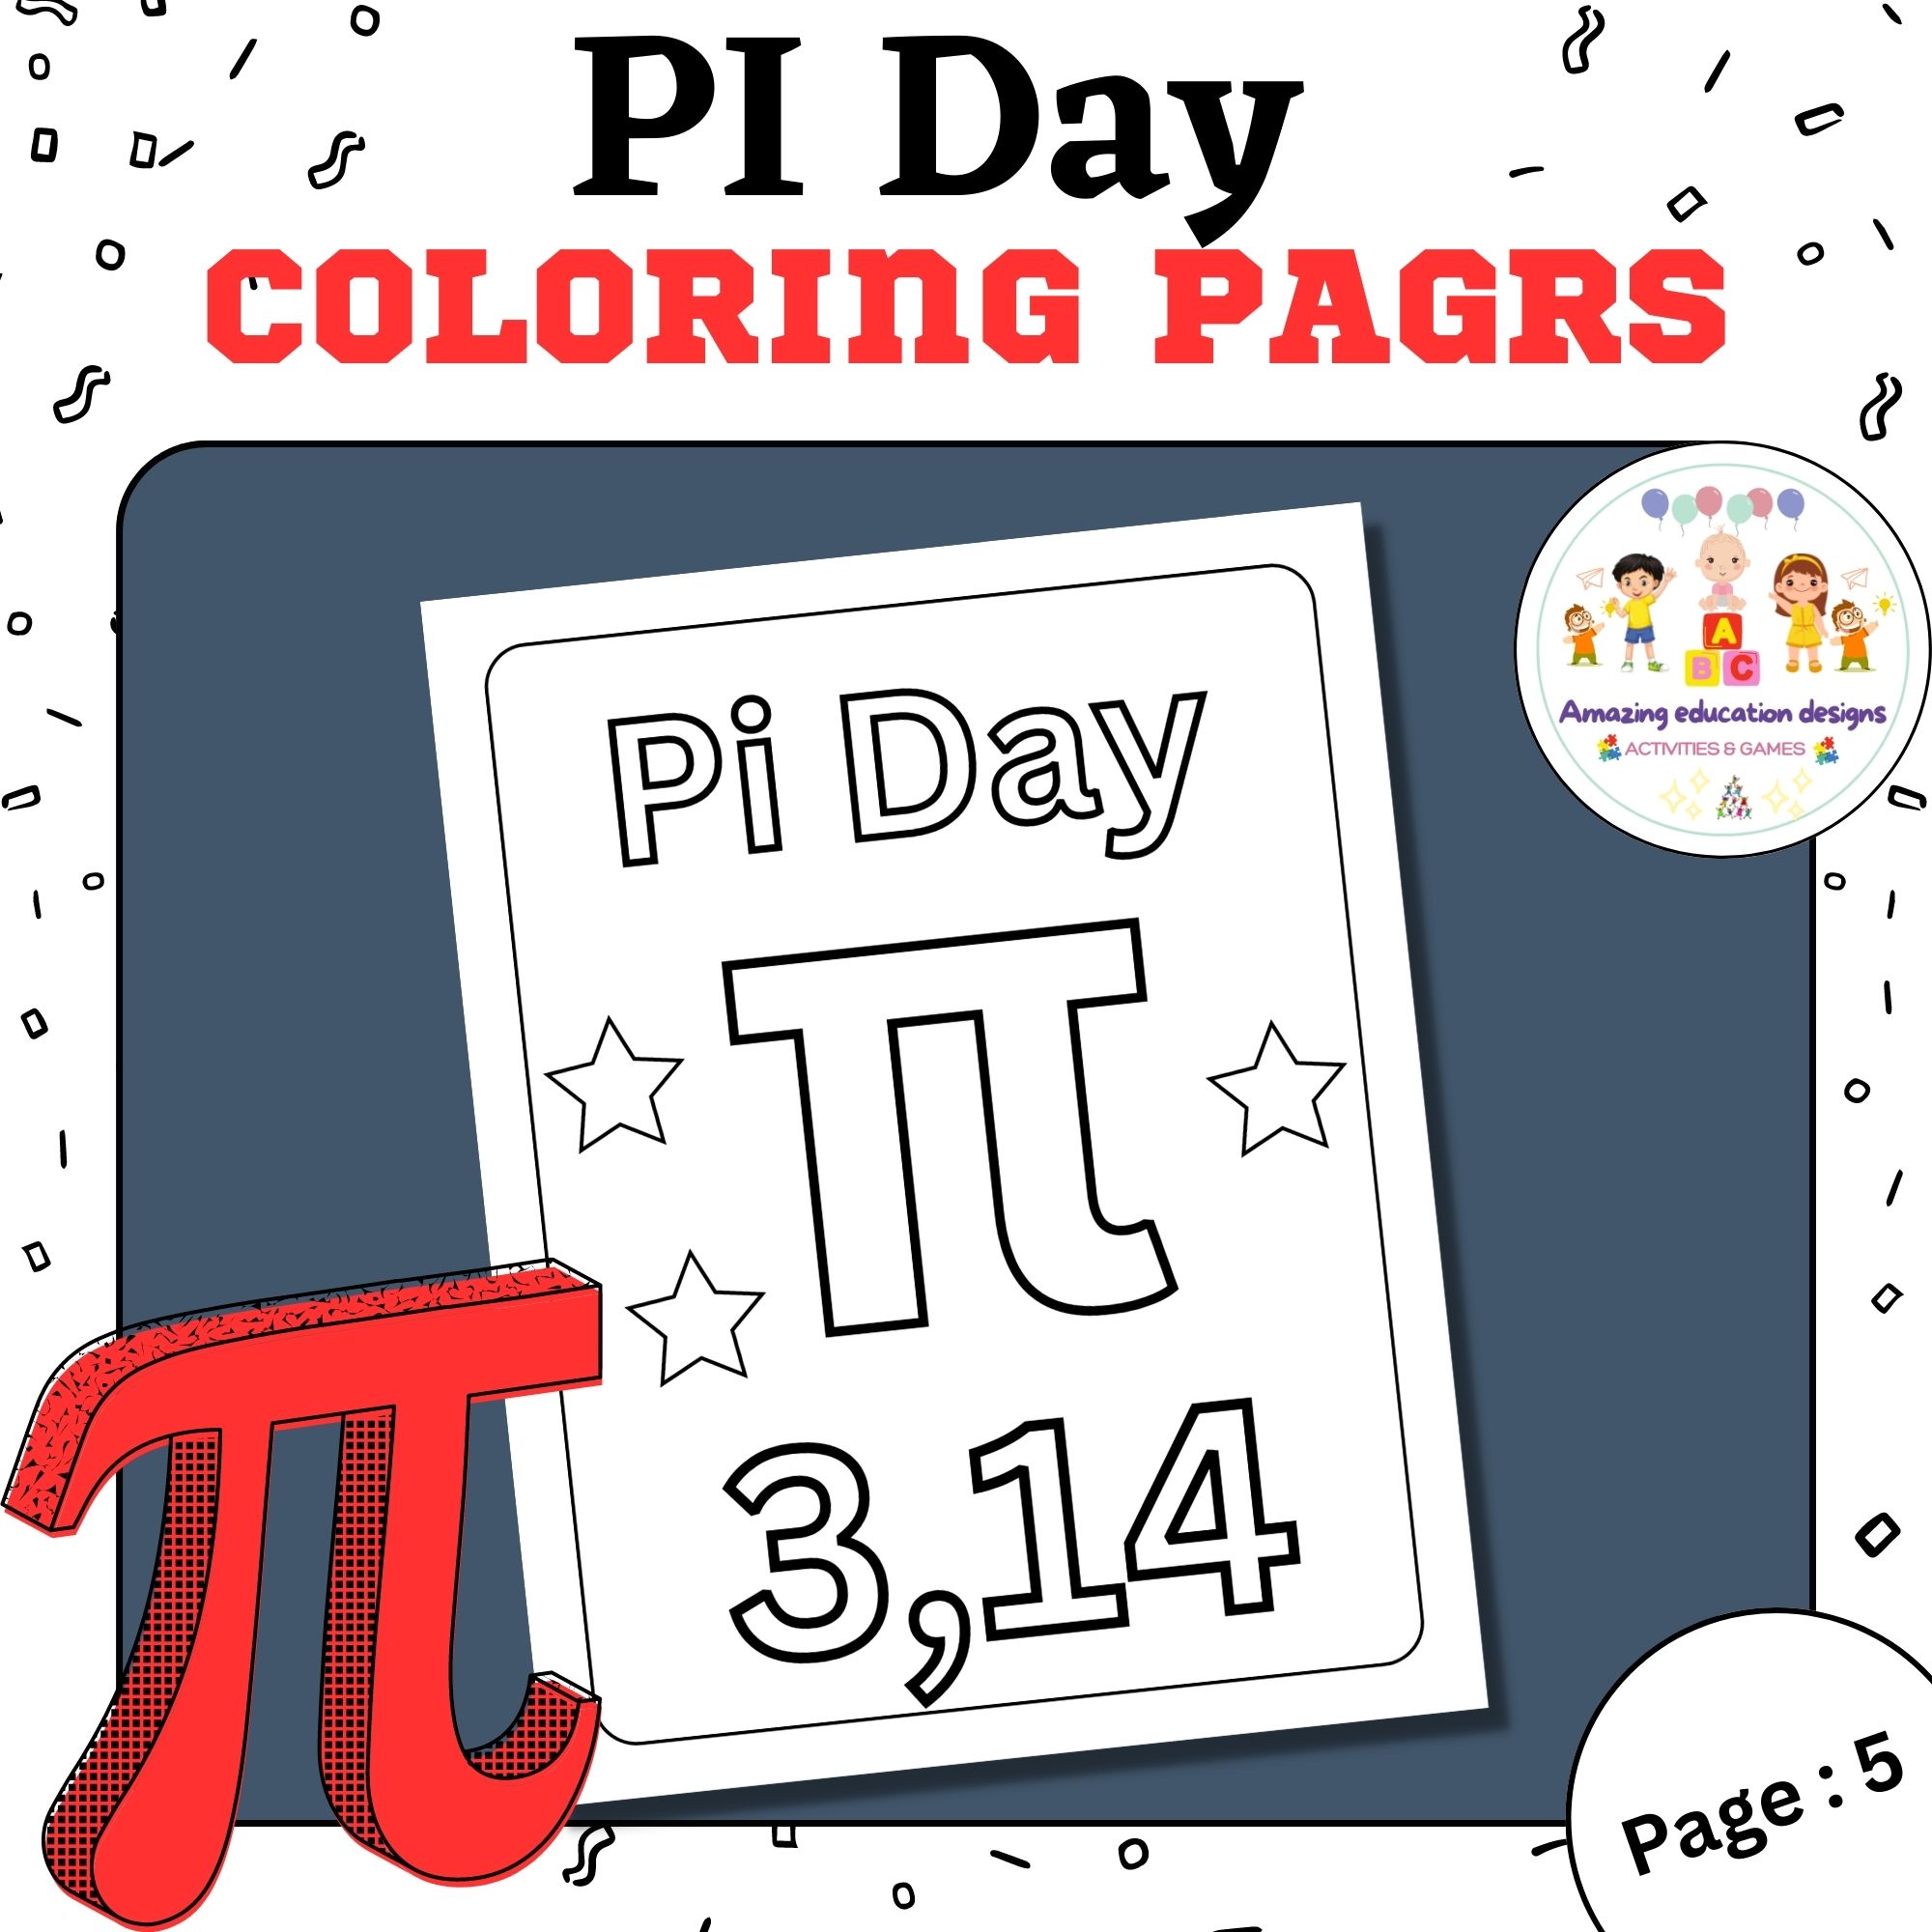 Pi day coloring pages made by teachers